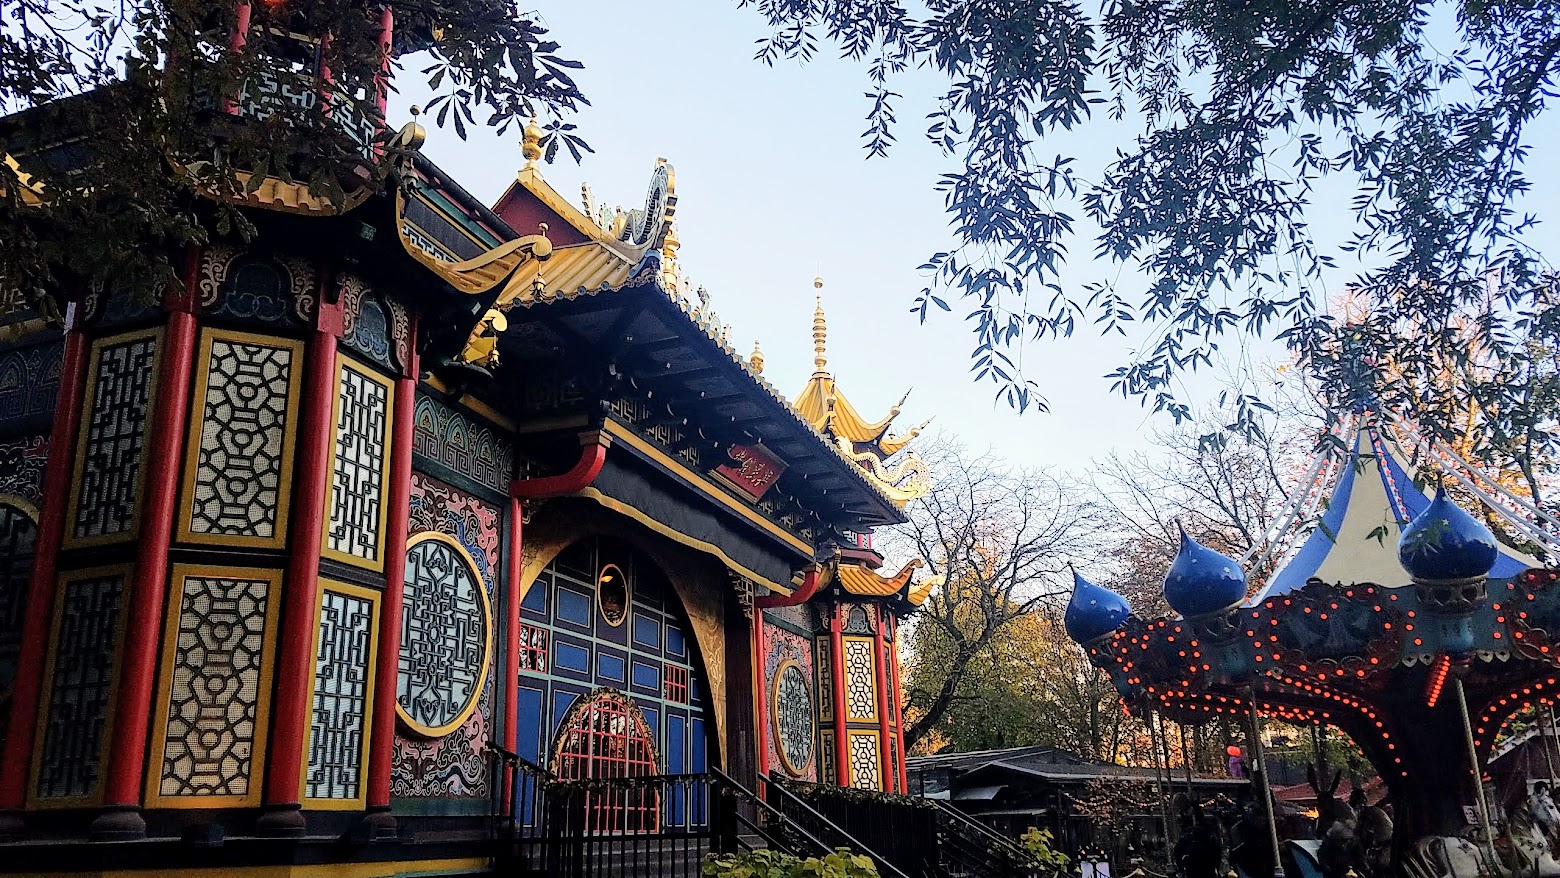 Pantomimeteatret, a Chinese style theater by a carousel / Visiting Tivoli Amusement park during Halloween decoration time, October 2018